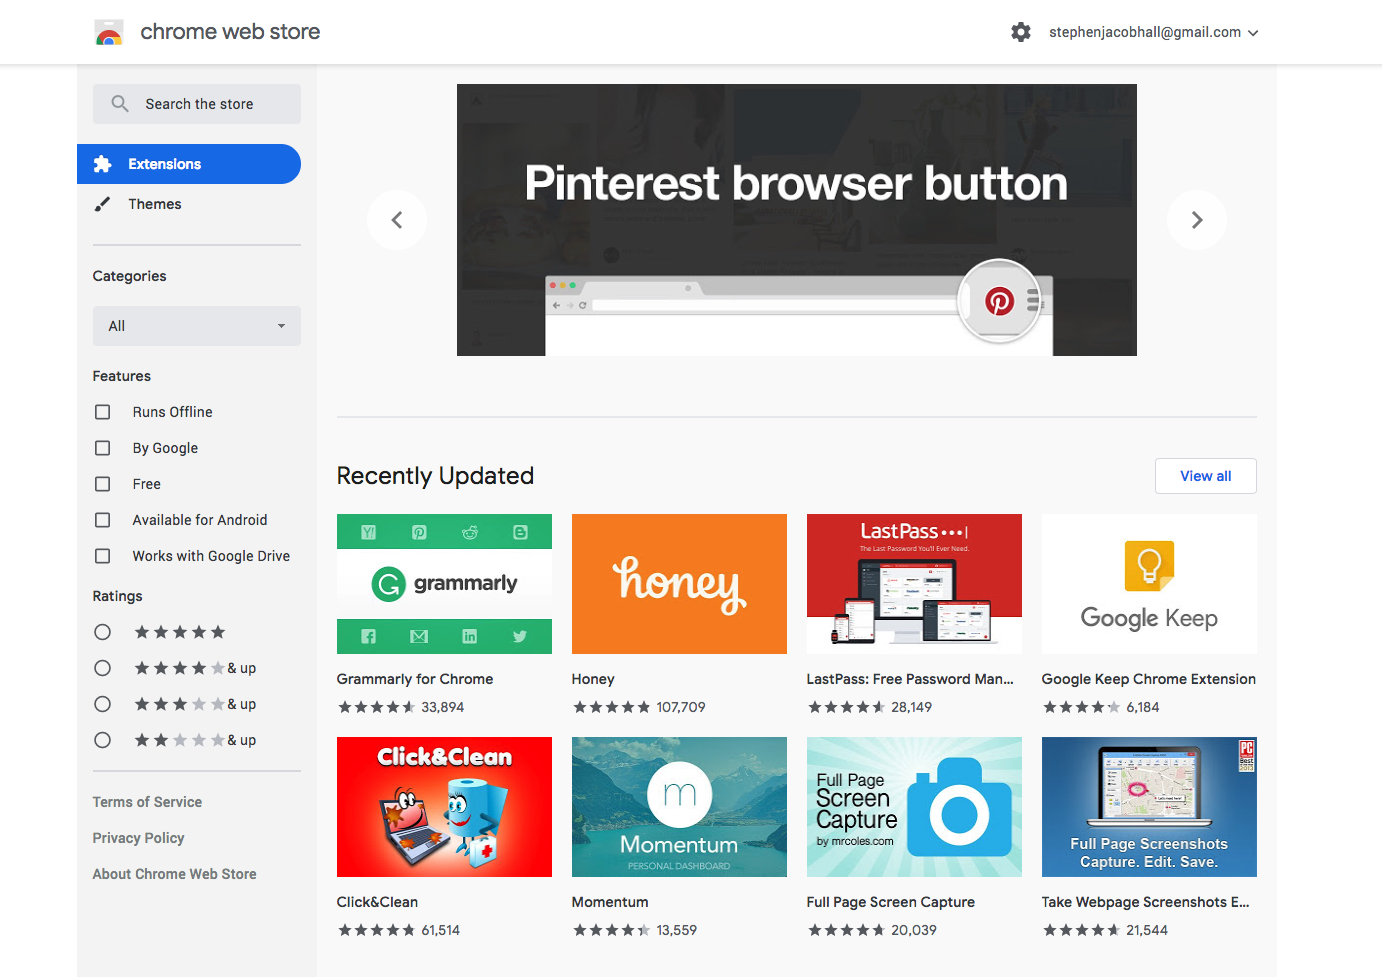 Chrome Web Store Gets The Google Material Theme Treatment